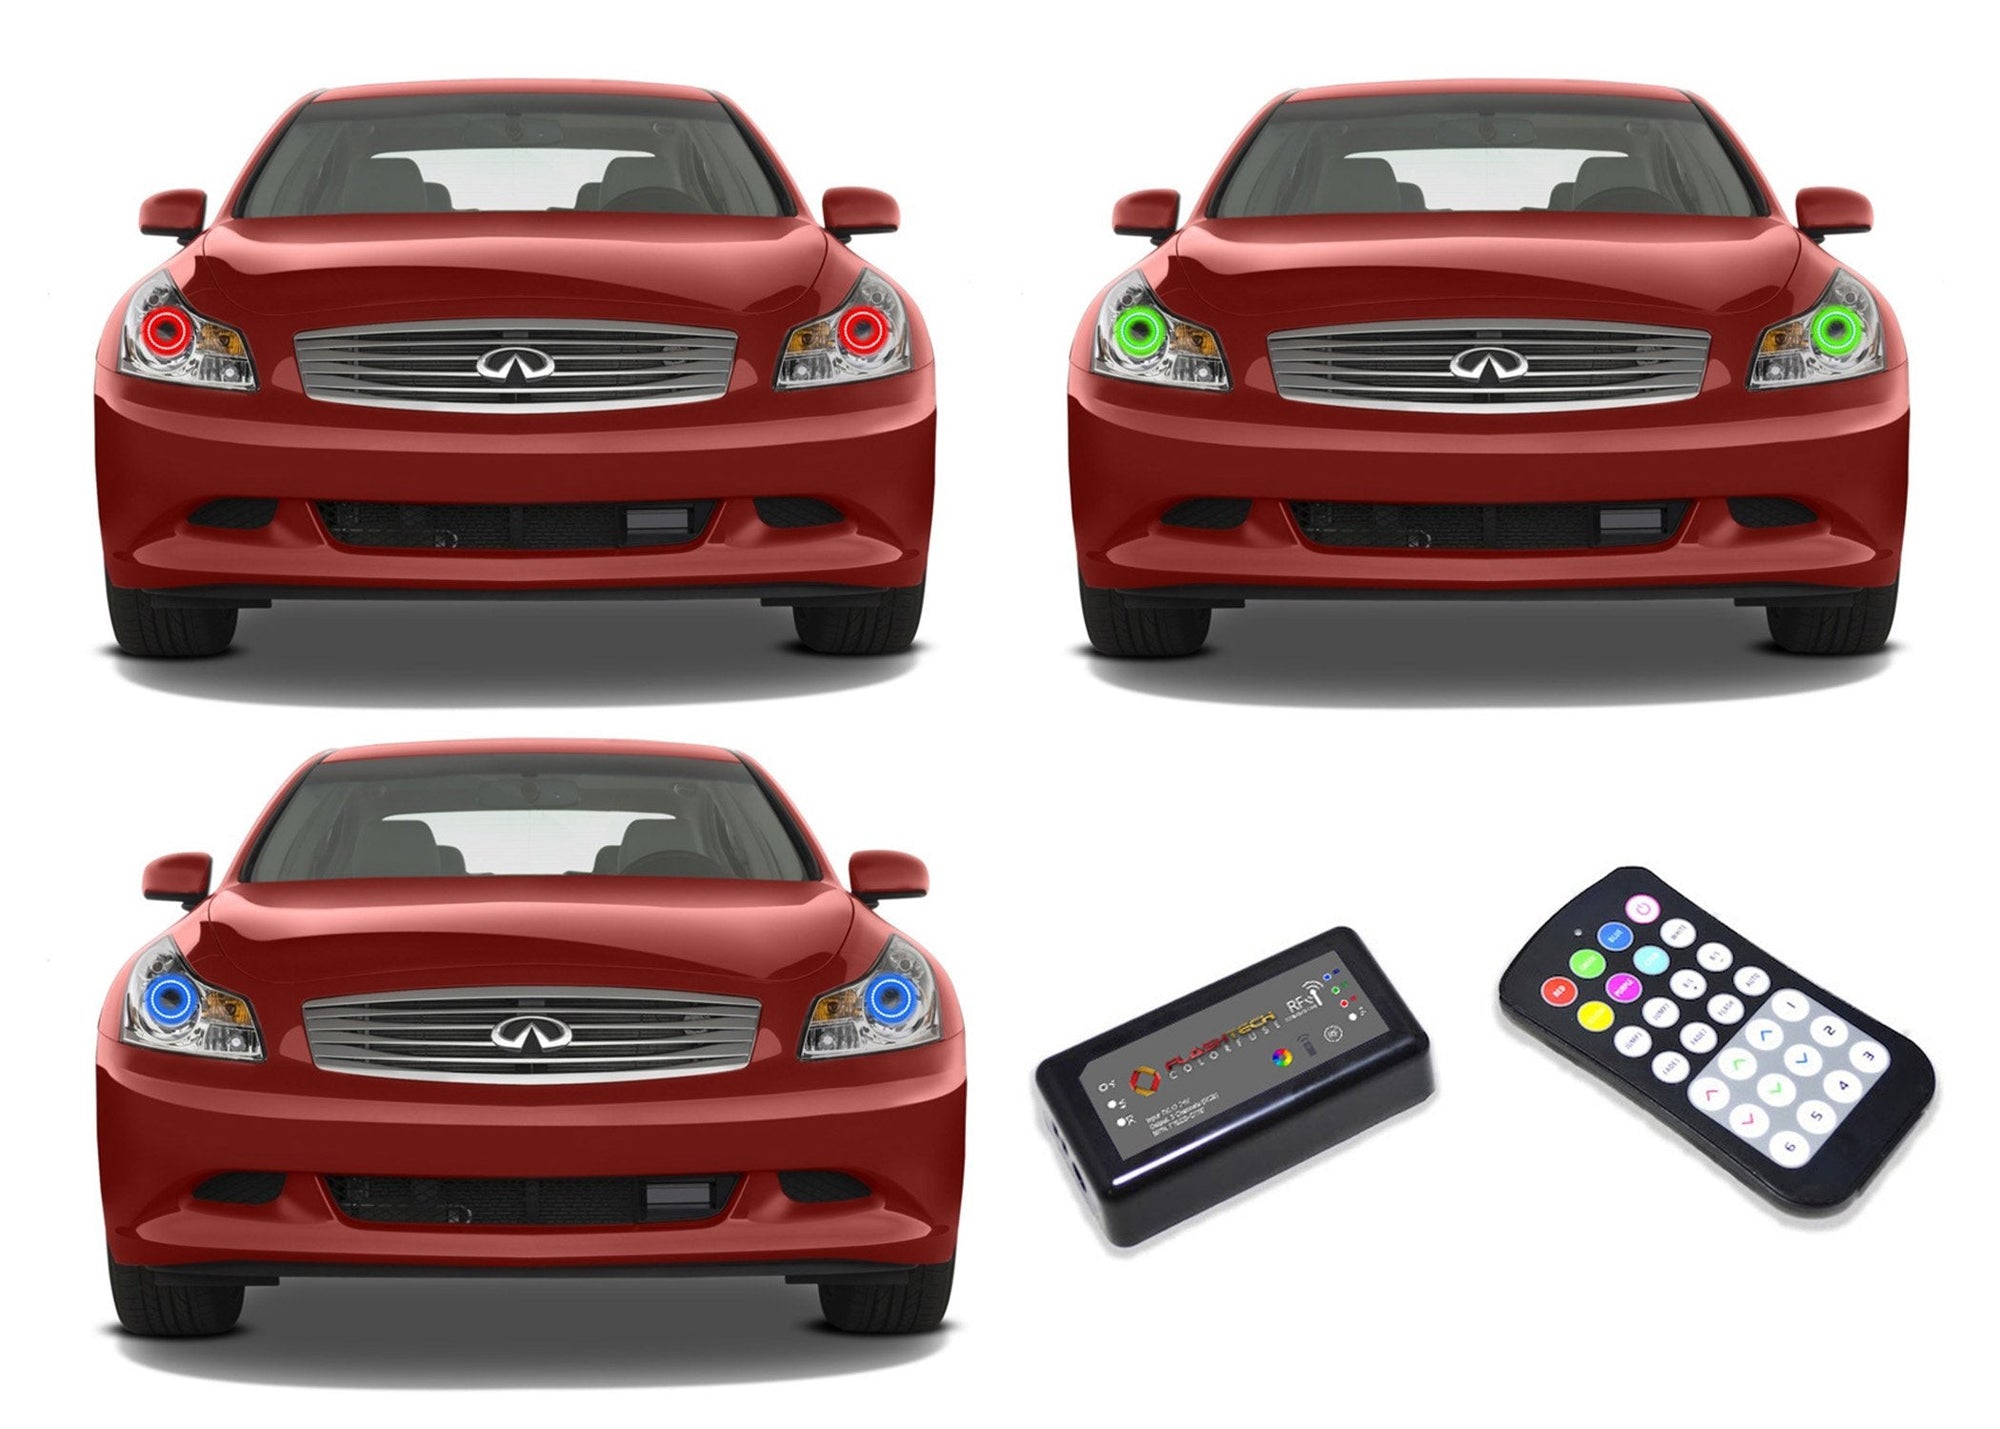 Infiniti-G35-2007, 2008, 2009-LED-Halo-Headlights-RGB-Colorfuse RF Remote-IN-G35S0709-V3HCFRF